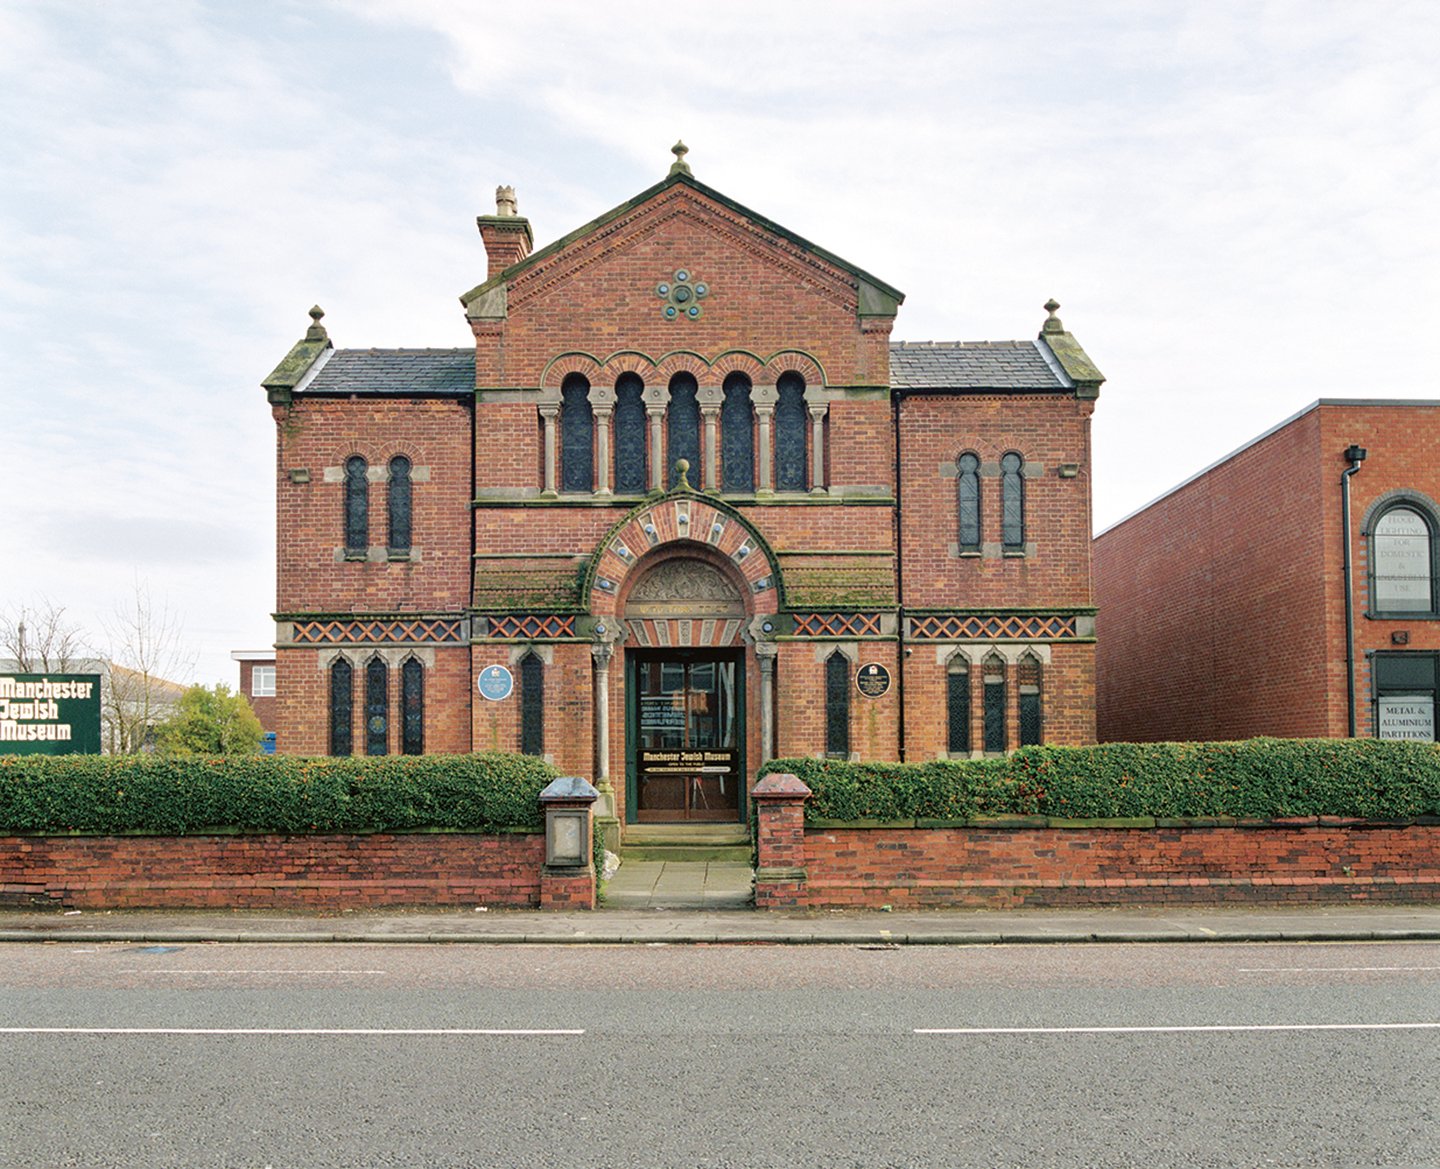 Former Manchester Spanish and Portuguese Synagogue, now Manchester Jewish Museum